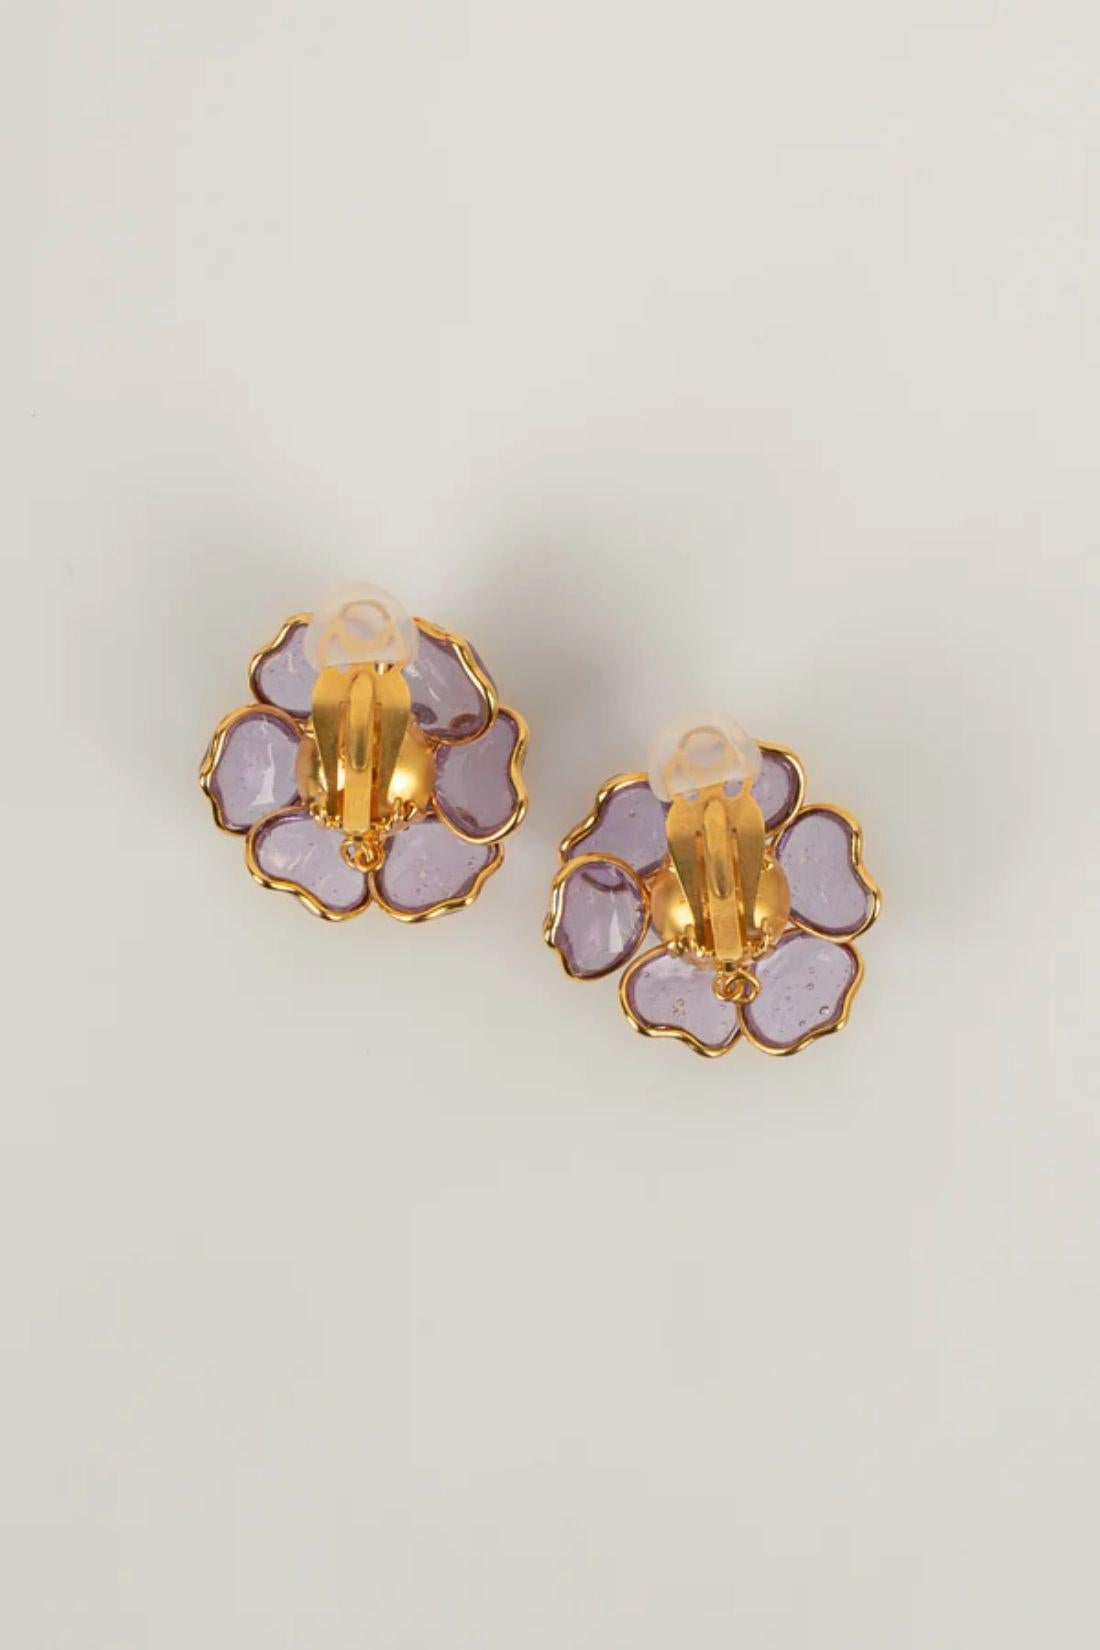 Augustine Earrings in Gold-Plated metal, Purple Glass Paste and Fancy Pearl For Sale 1